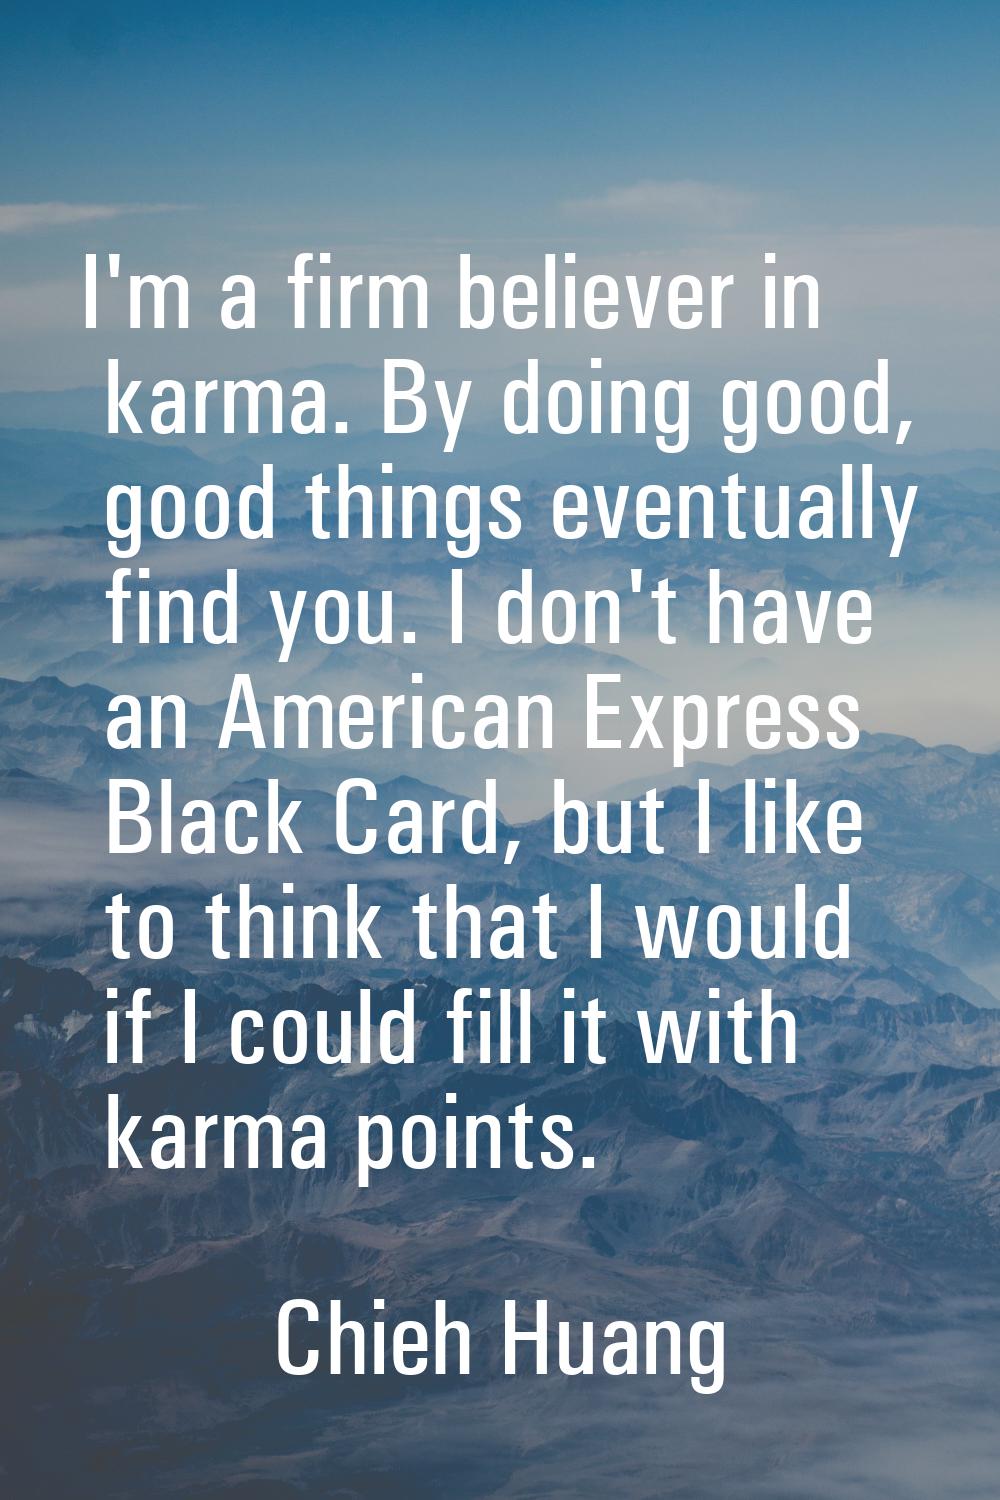 I'm a firm believer in karma. By doing good, good things eventually find you. I don't have an Ameri